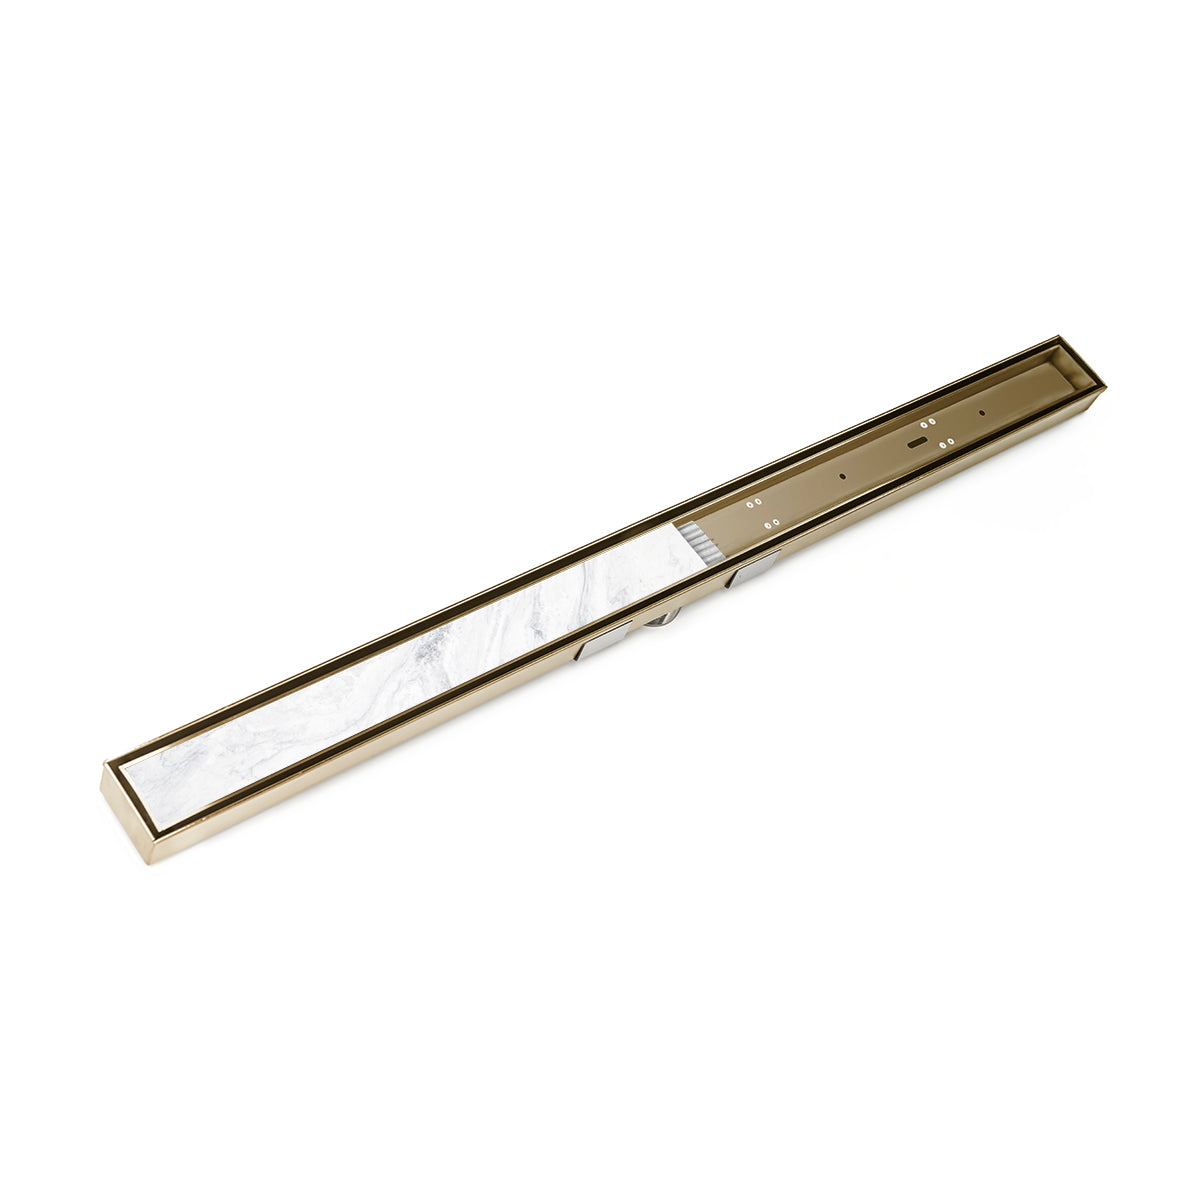 Infinity Drain 48" S-Stainless Steel Series Site Sizable Linear Drain Kit with Low Profile Tile Insert Frame